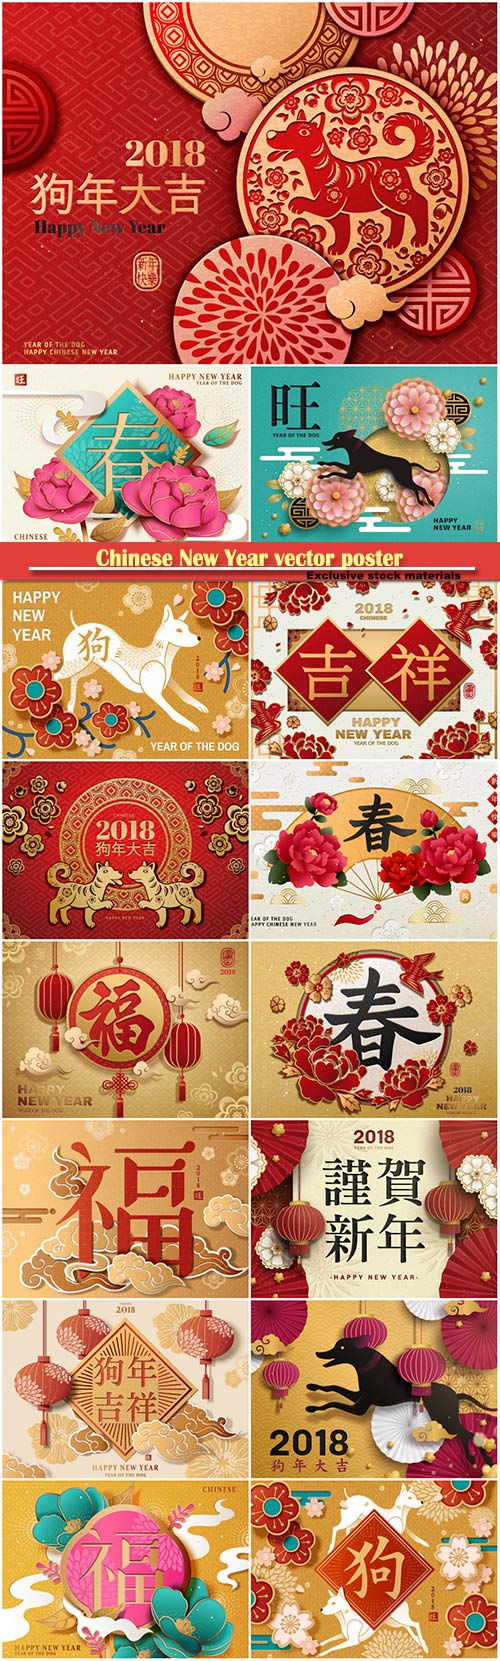 Chinese New Year vector poster, auspicious dog year in Chinese word